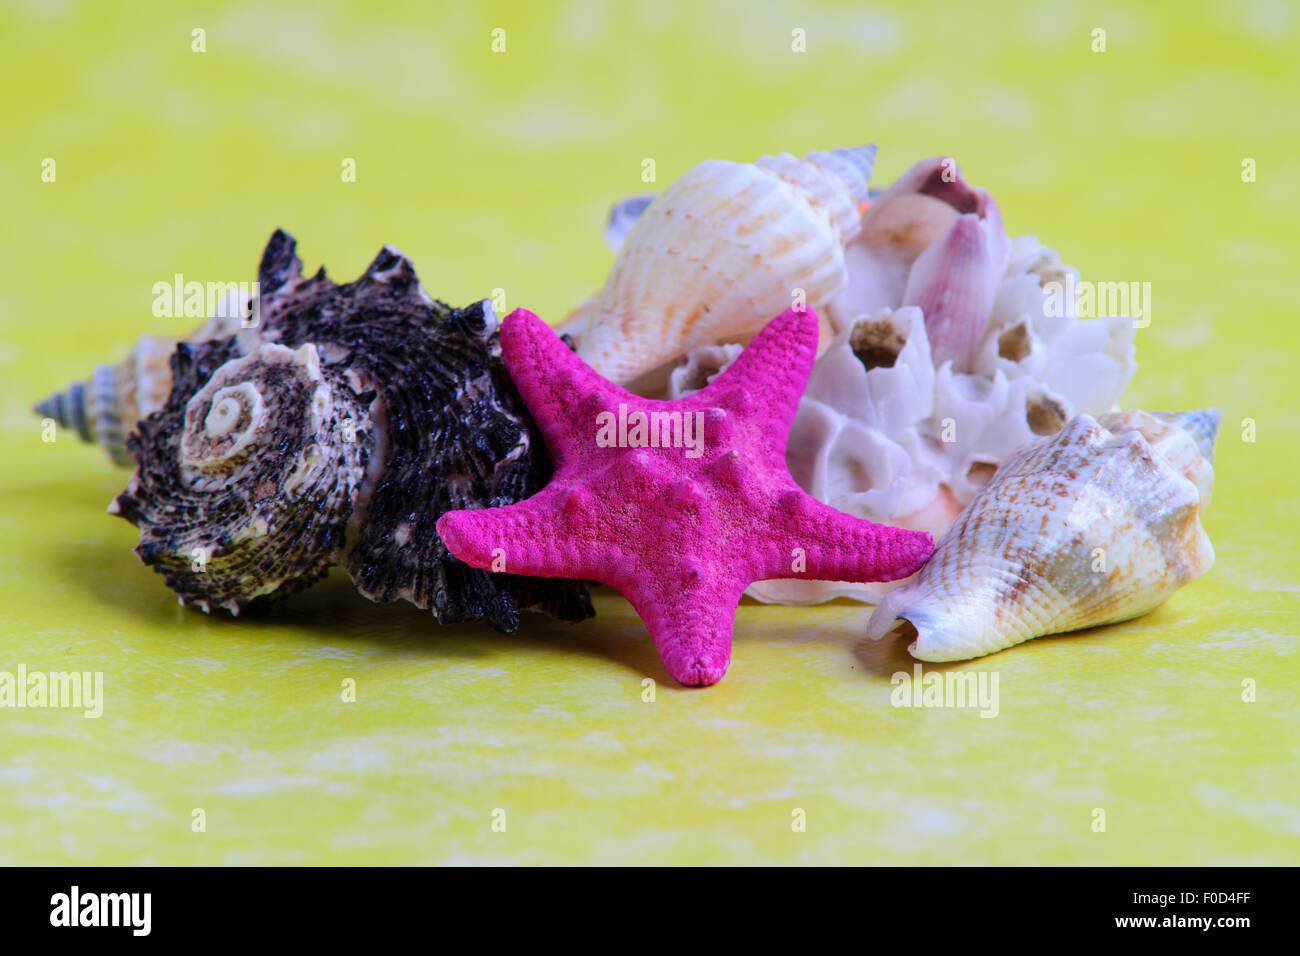 MINERAL, SEA SHELLS, SHELLS BEACH, CLOSE-UP ISOLATED WHITE BACKGROUND Stock Photo